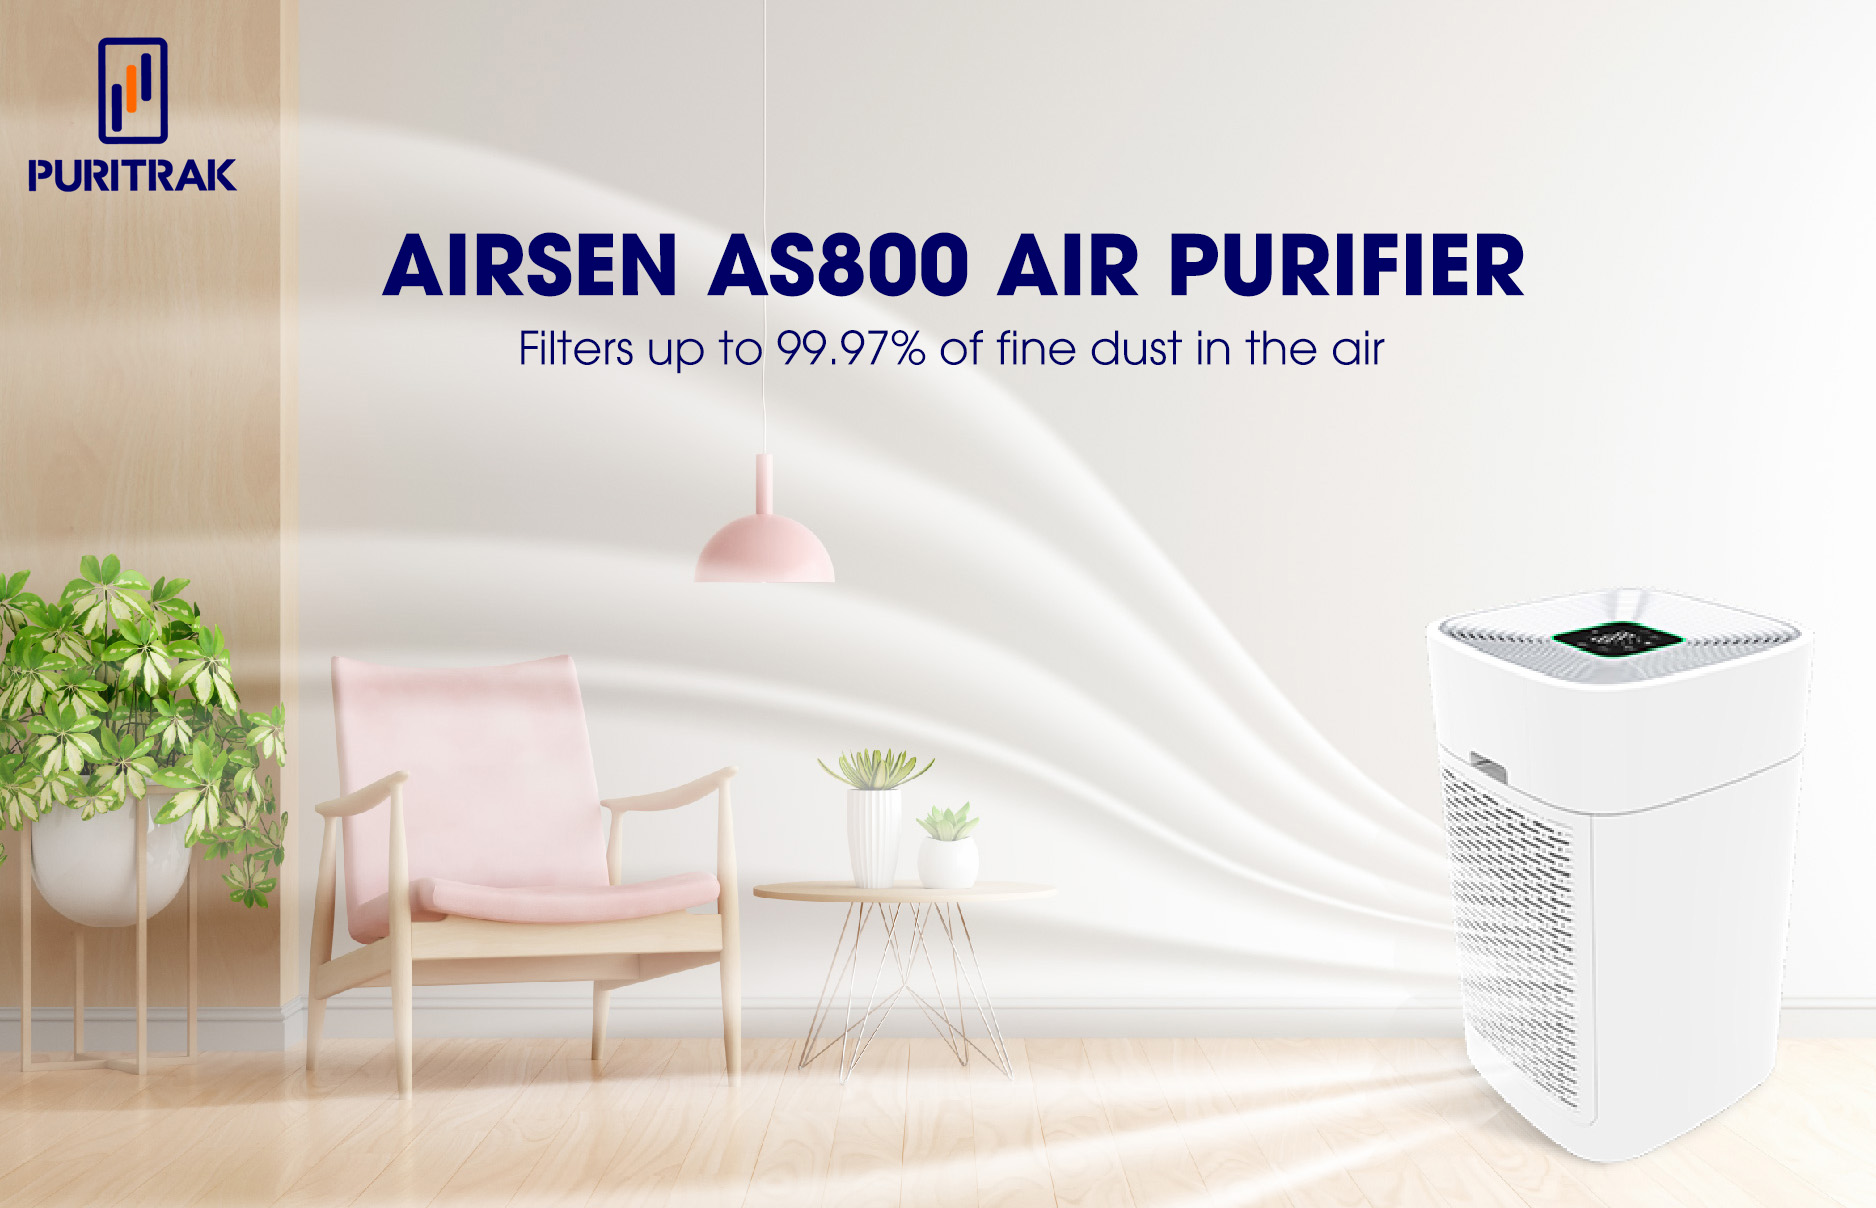 Airsen AS800 Air Purifier - Filters Fine Dust up to 99.97%